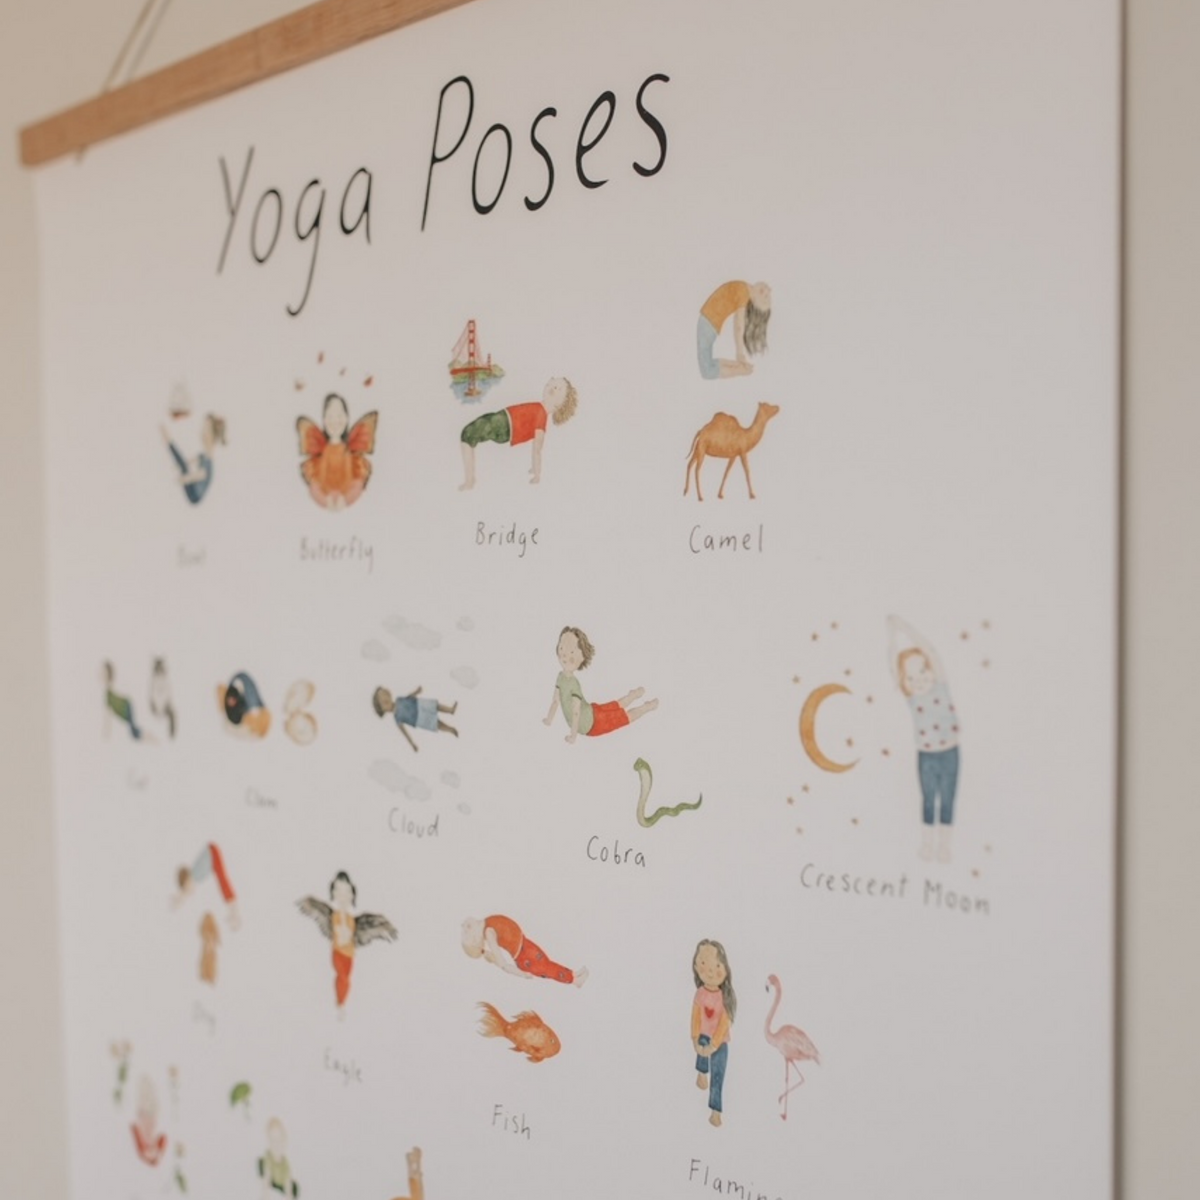 yoga positions for kids